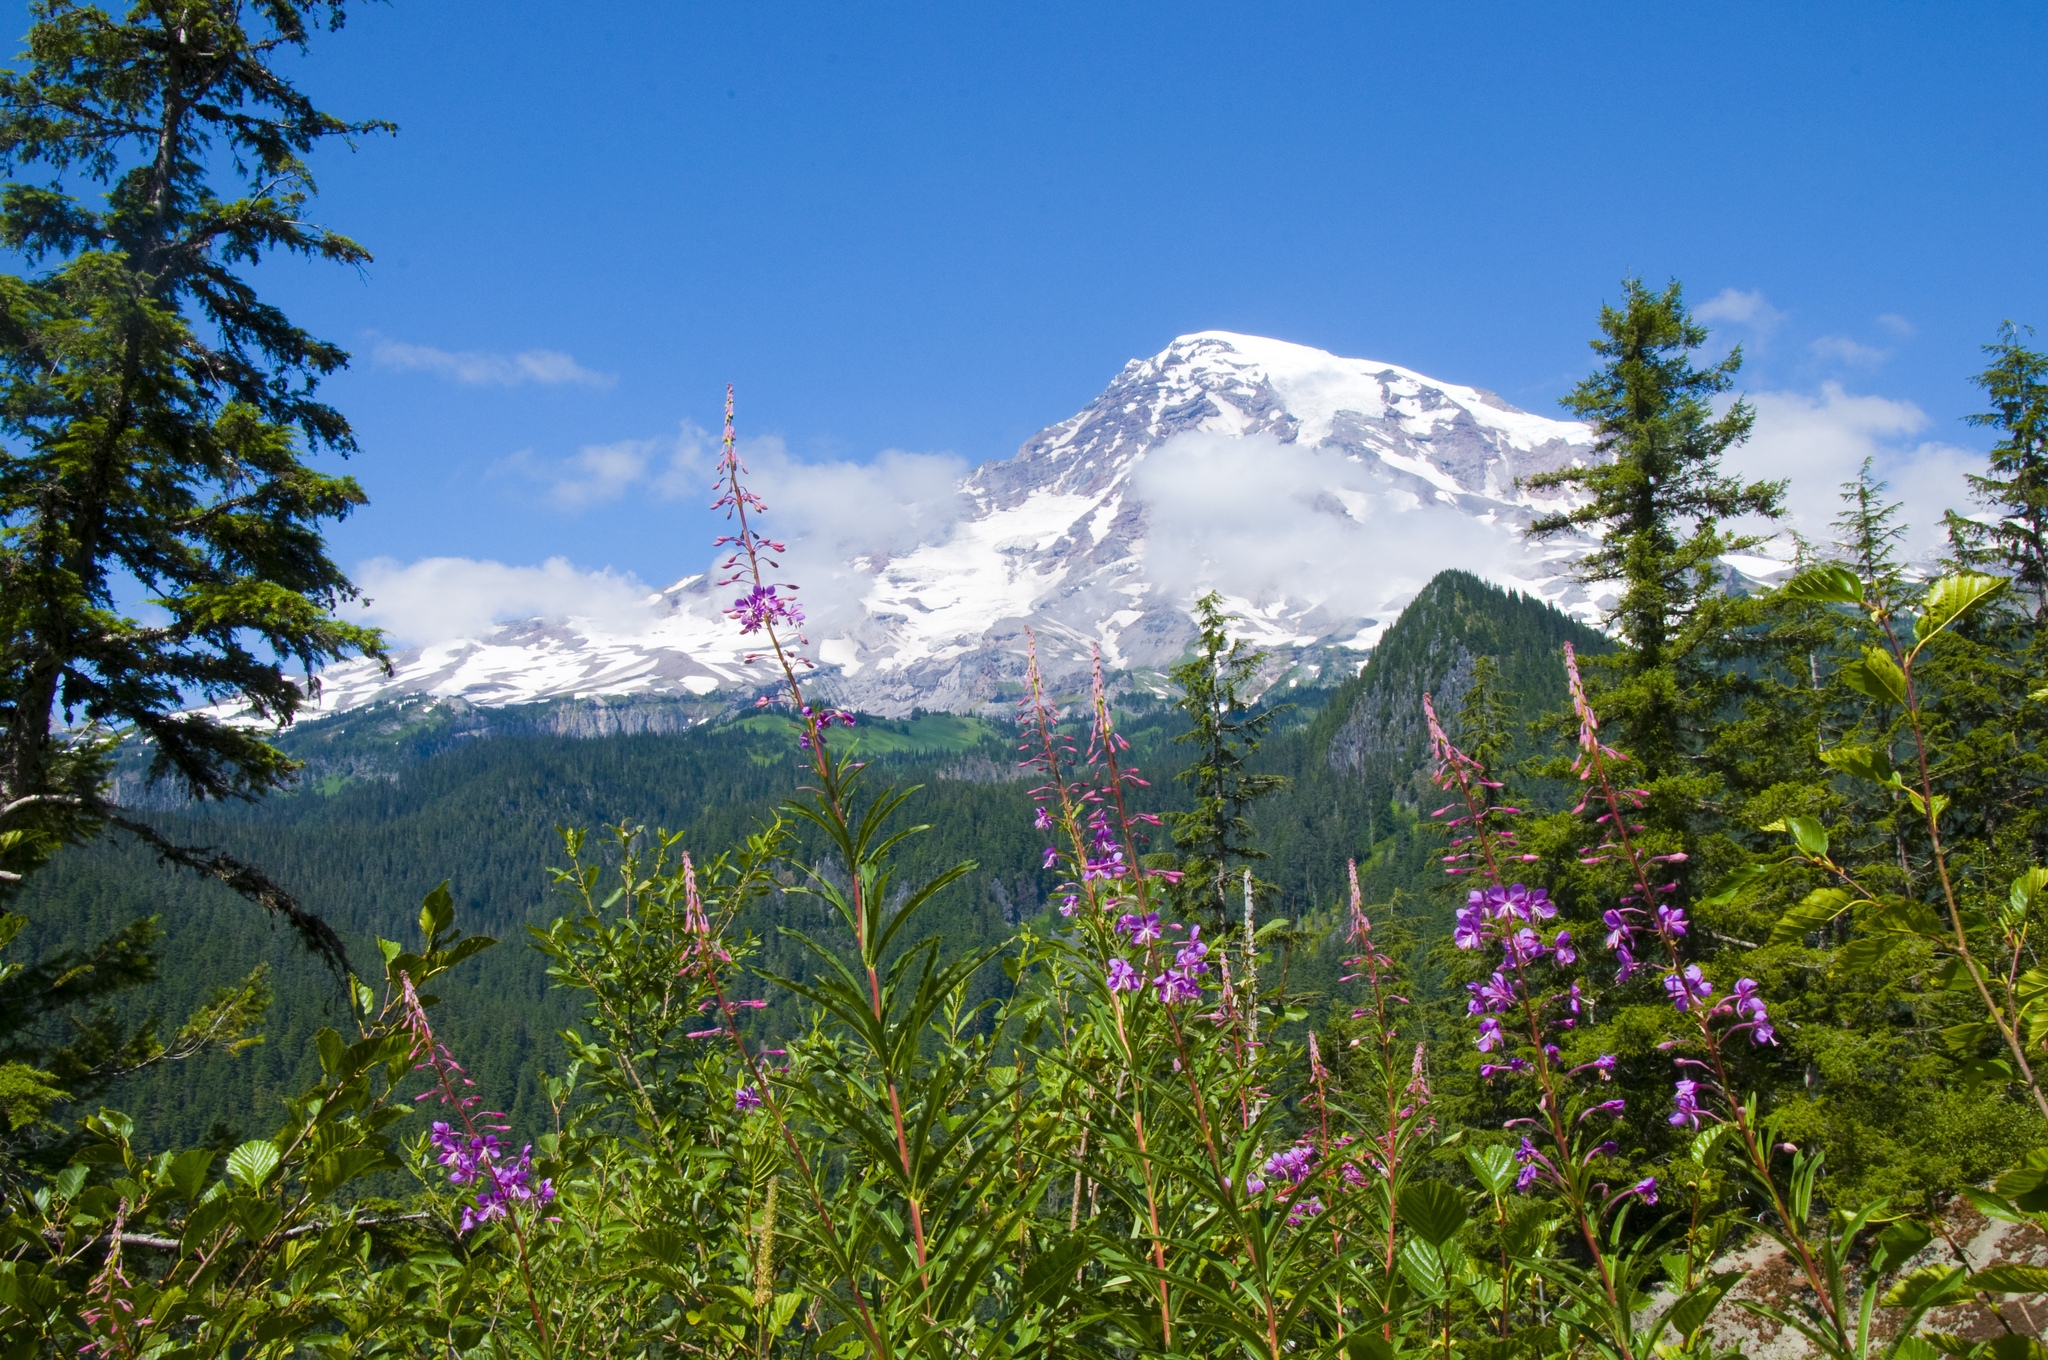 66722 download wallpaper nature, flowers, mountains, forest, mount rainier national park screensavers and pictures for free